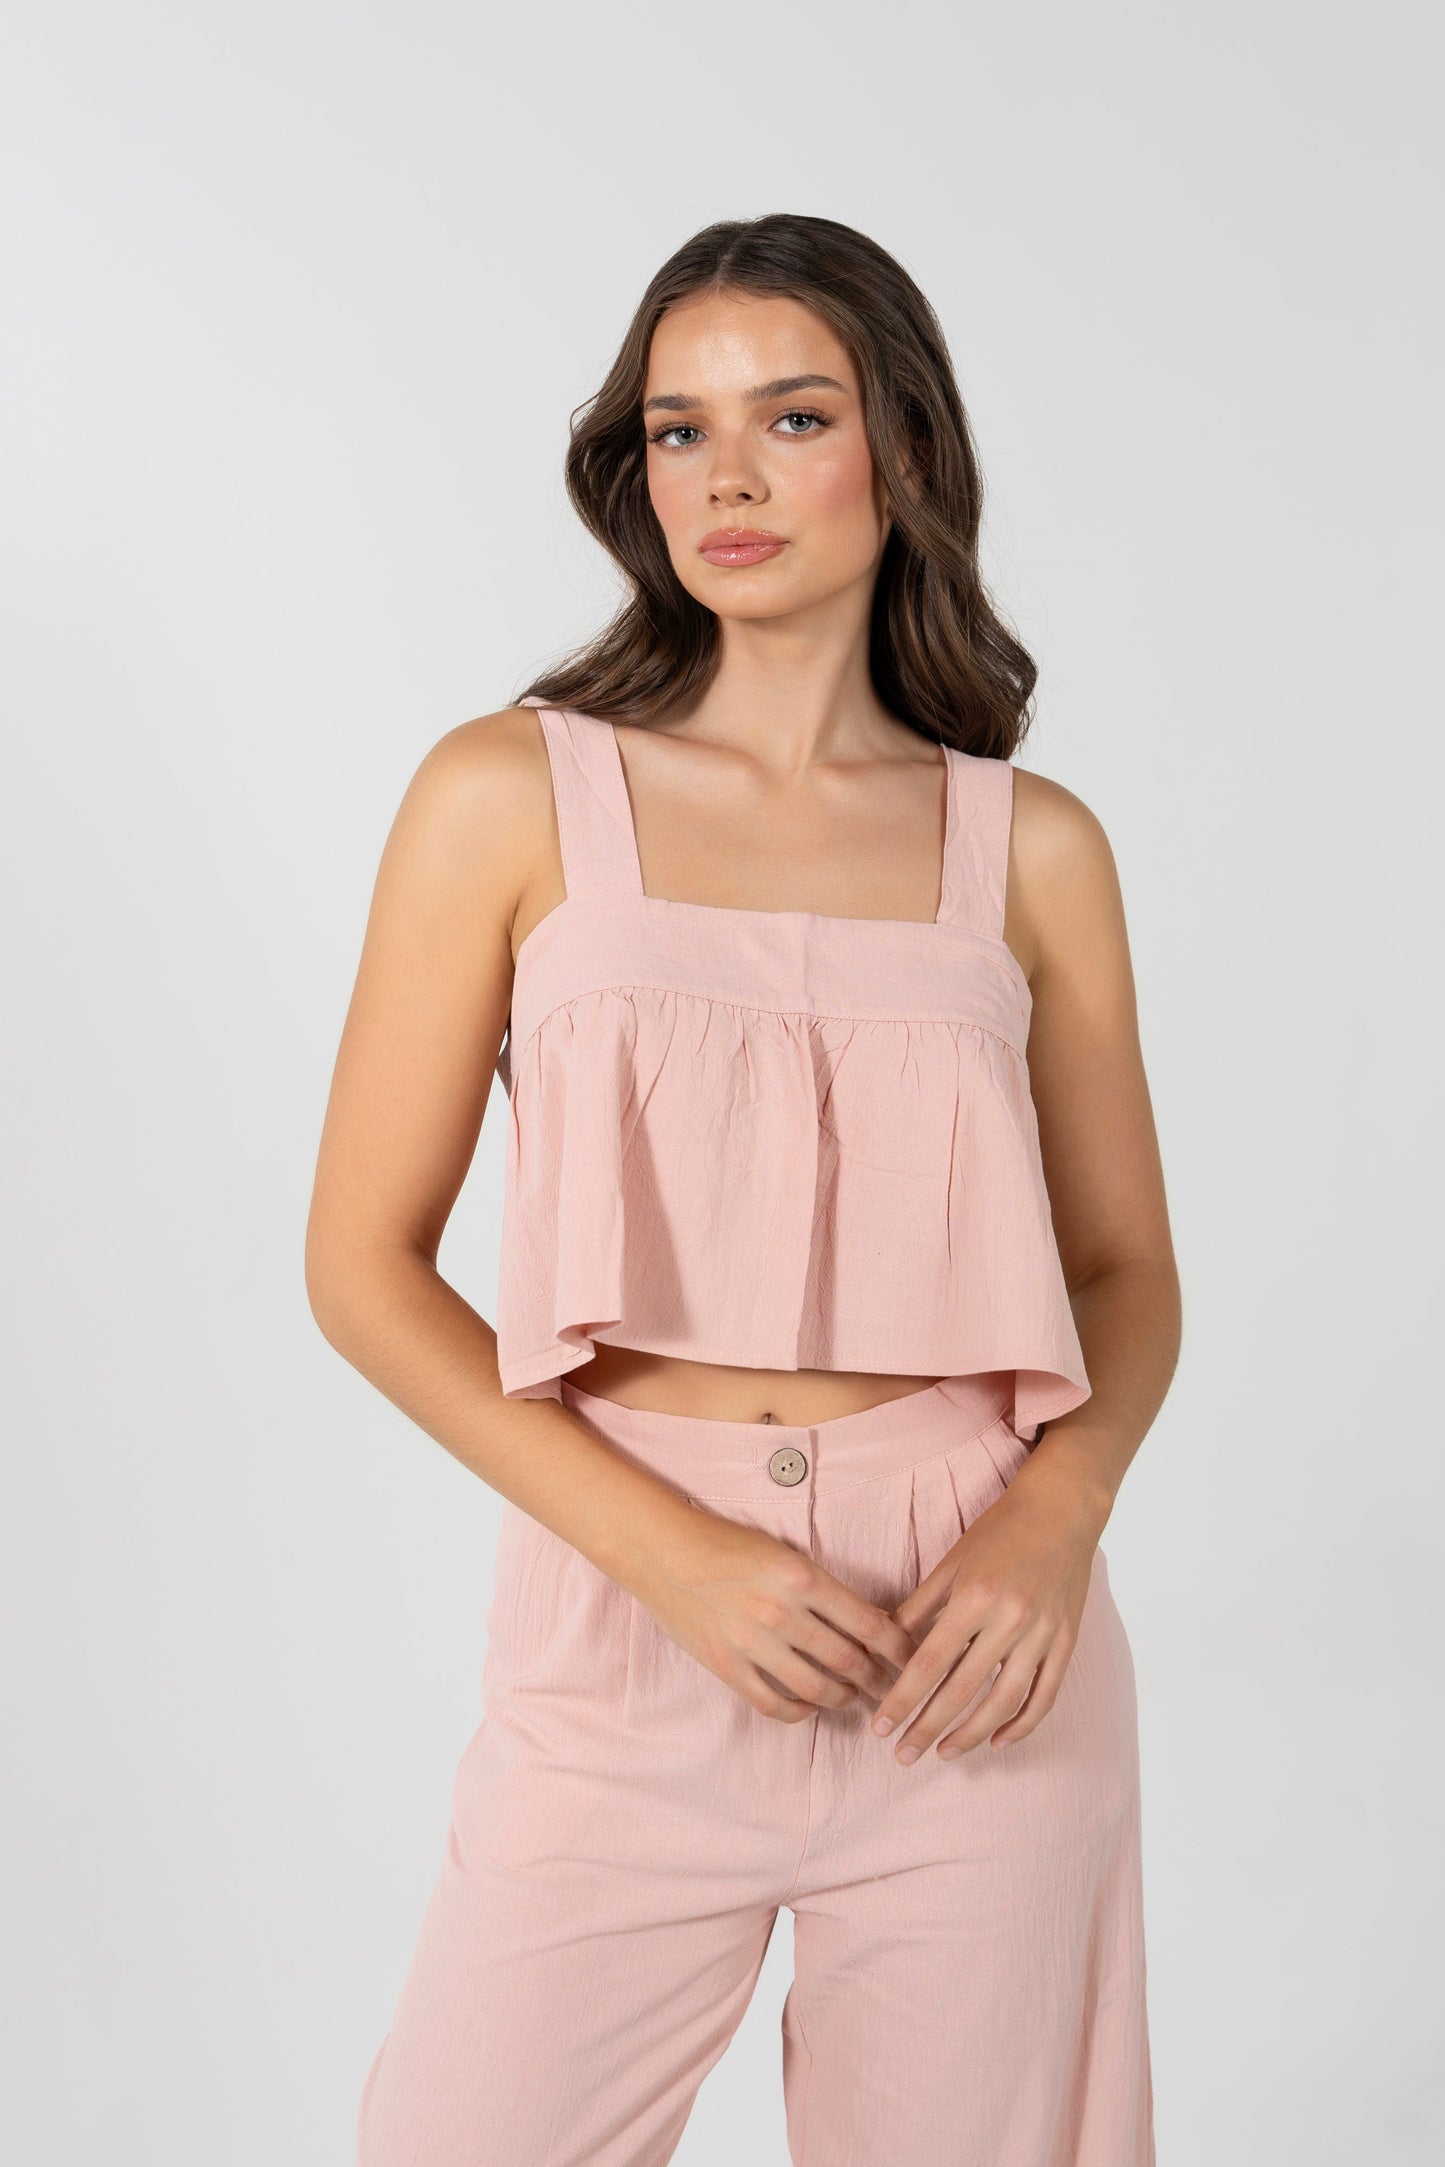 ALORA 7/8 HIGH WAISTED PANT IN DUSTY ROSE